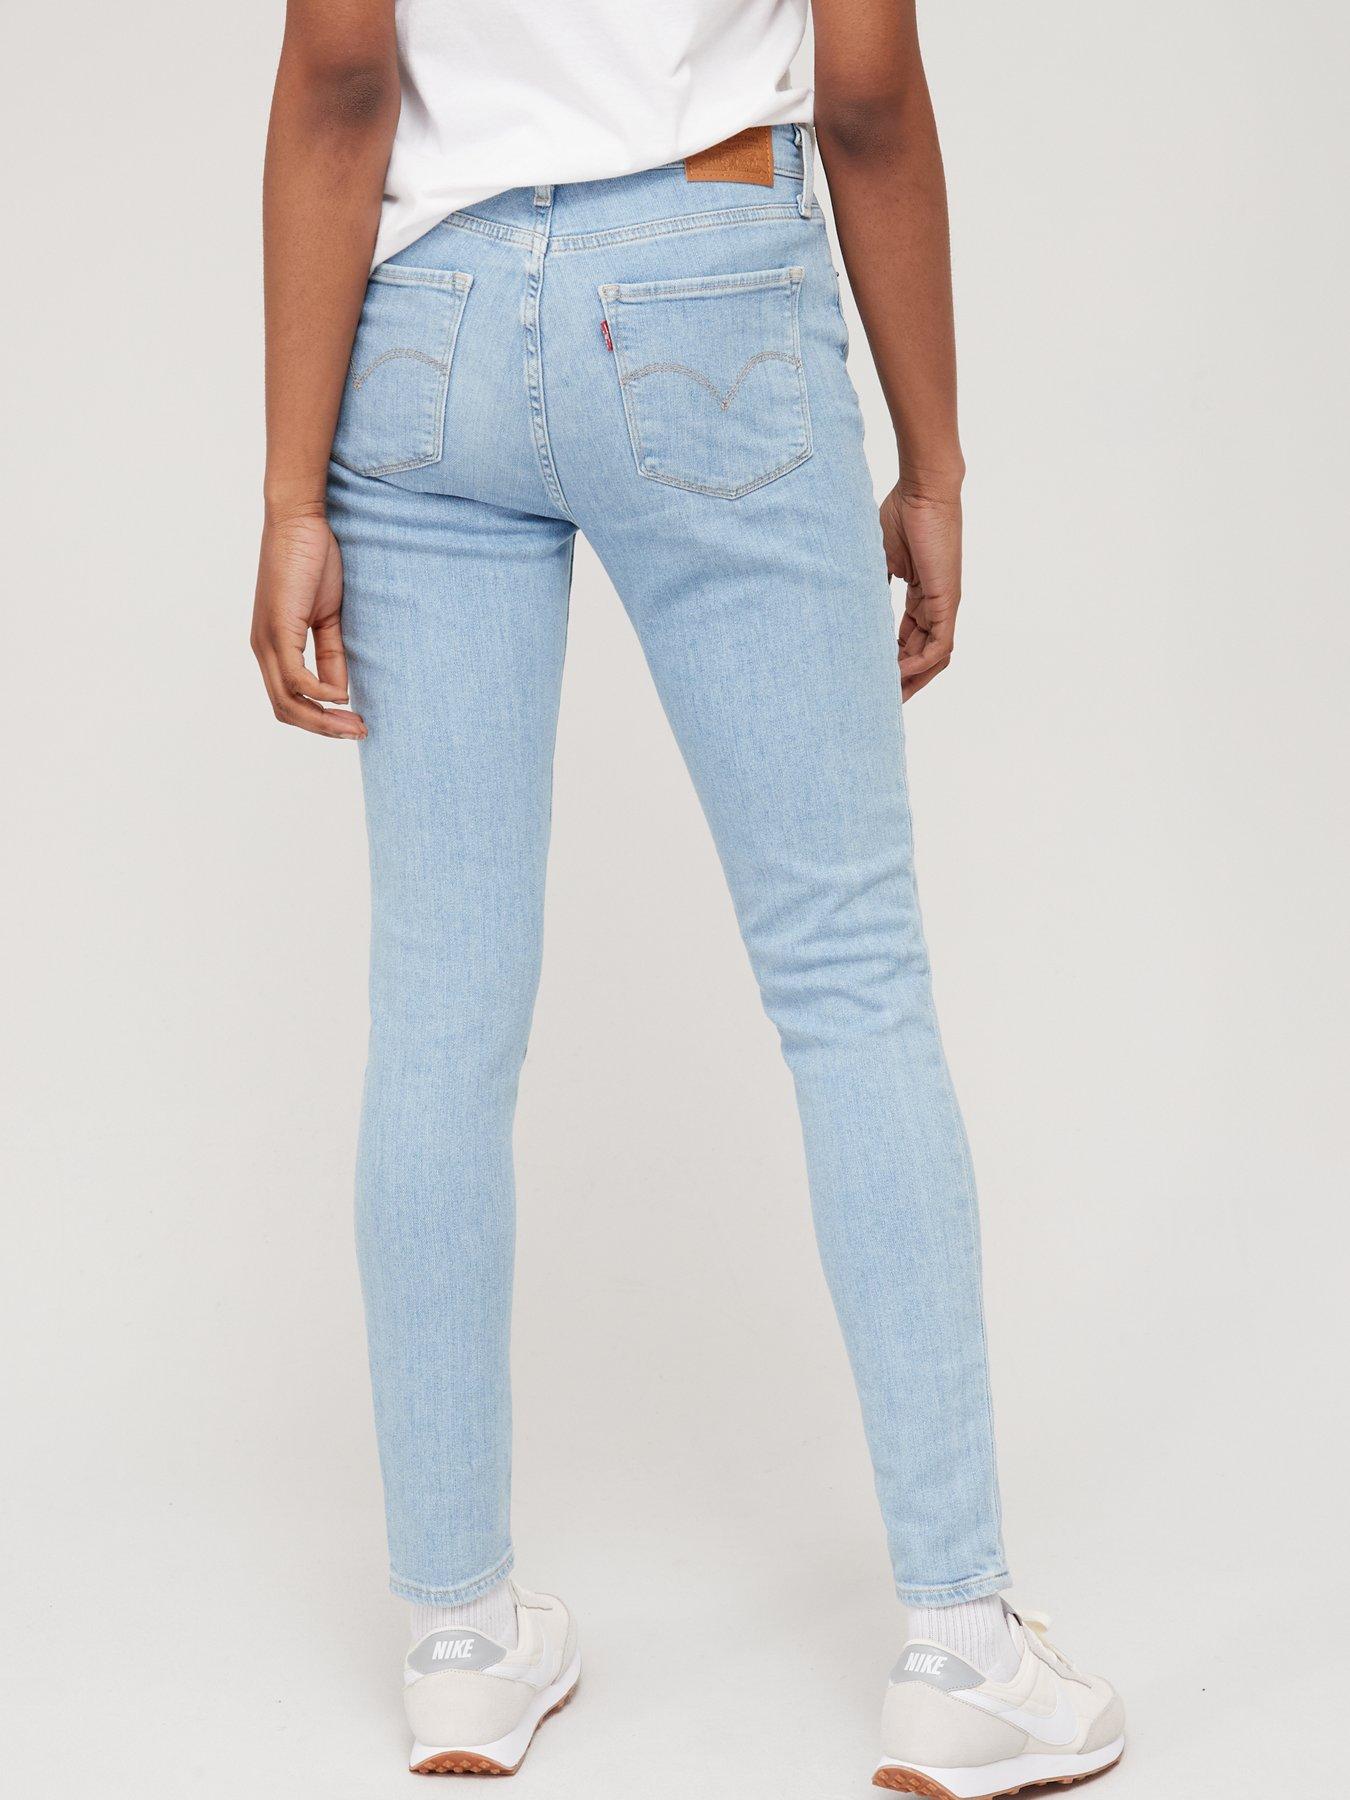 Levi's 721 High Rise Skinny Jean - Snatched - Blue 